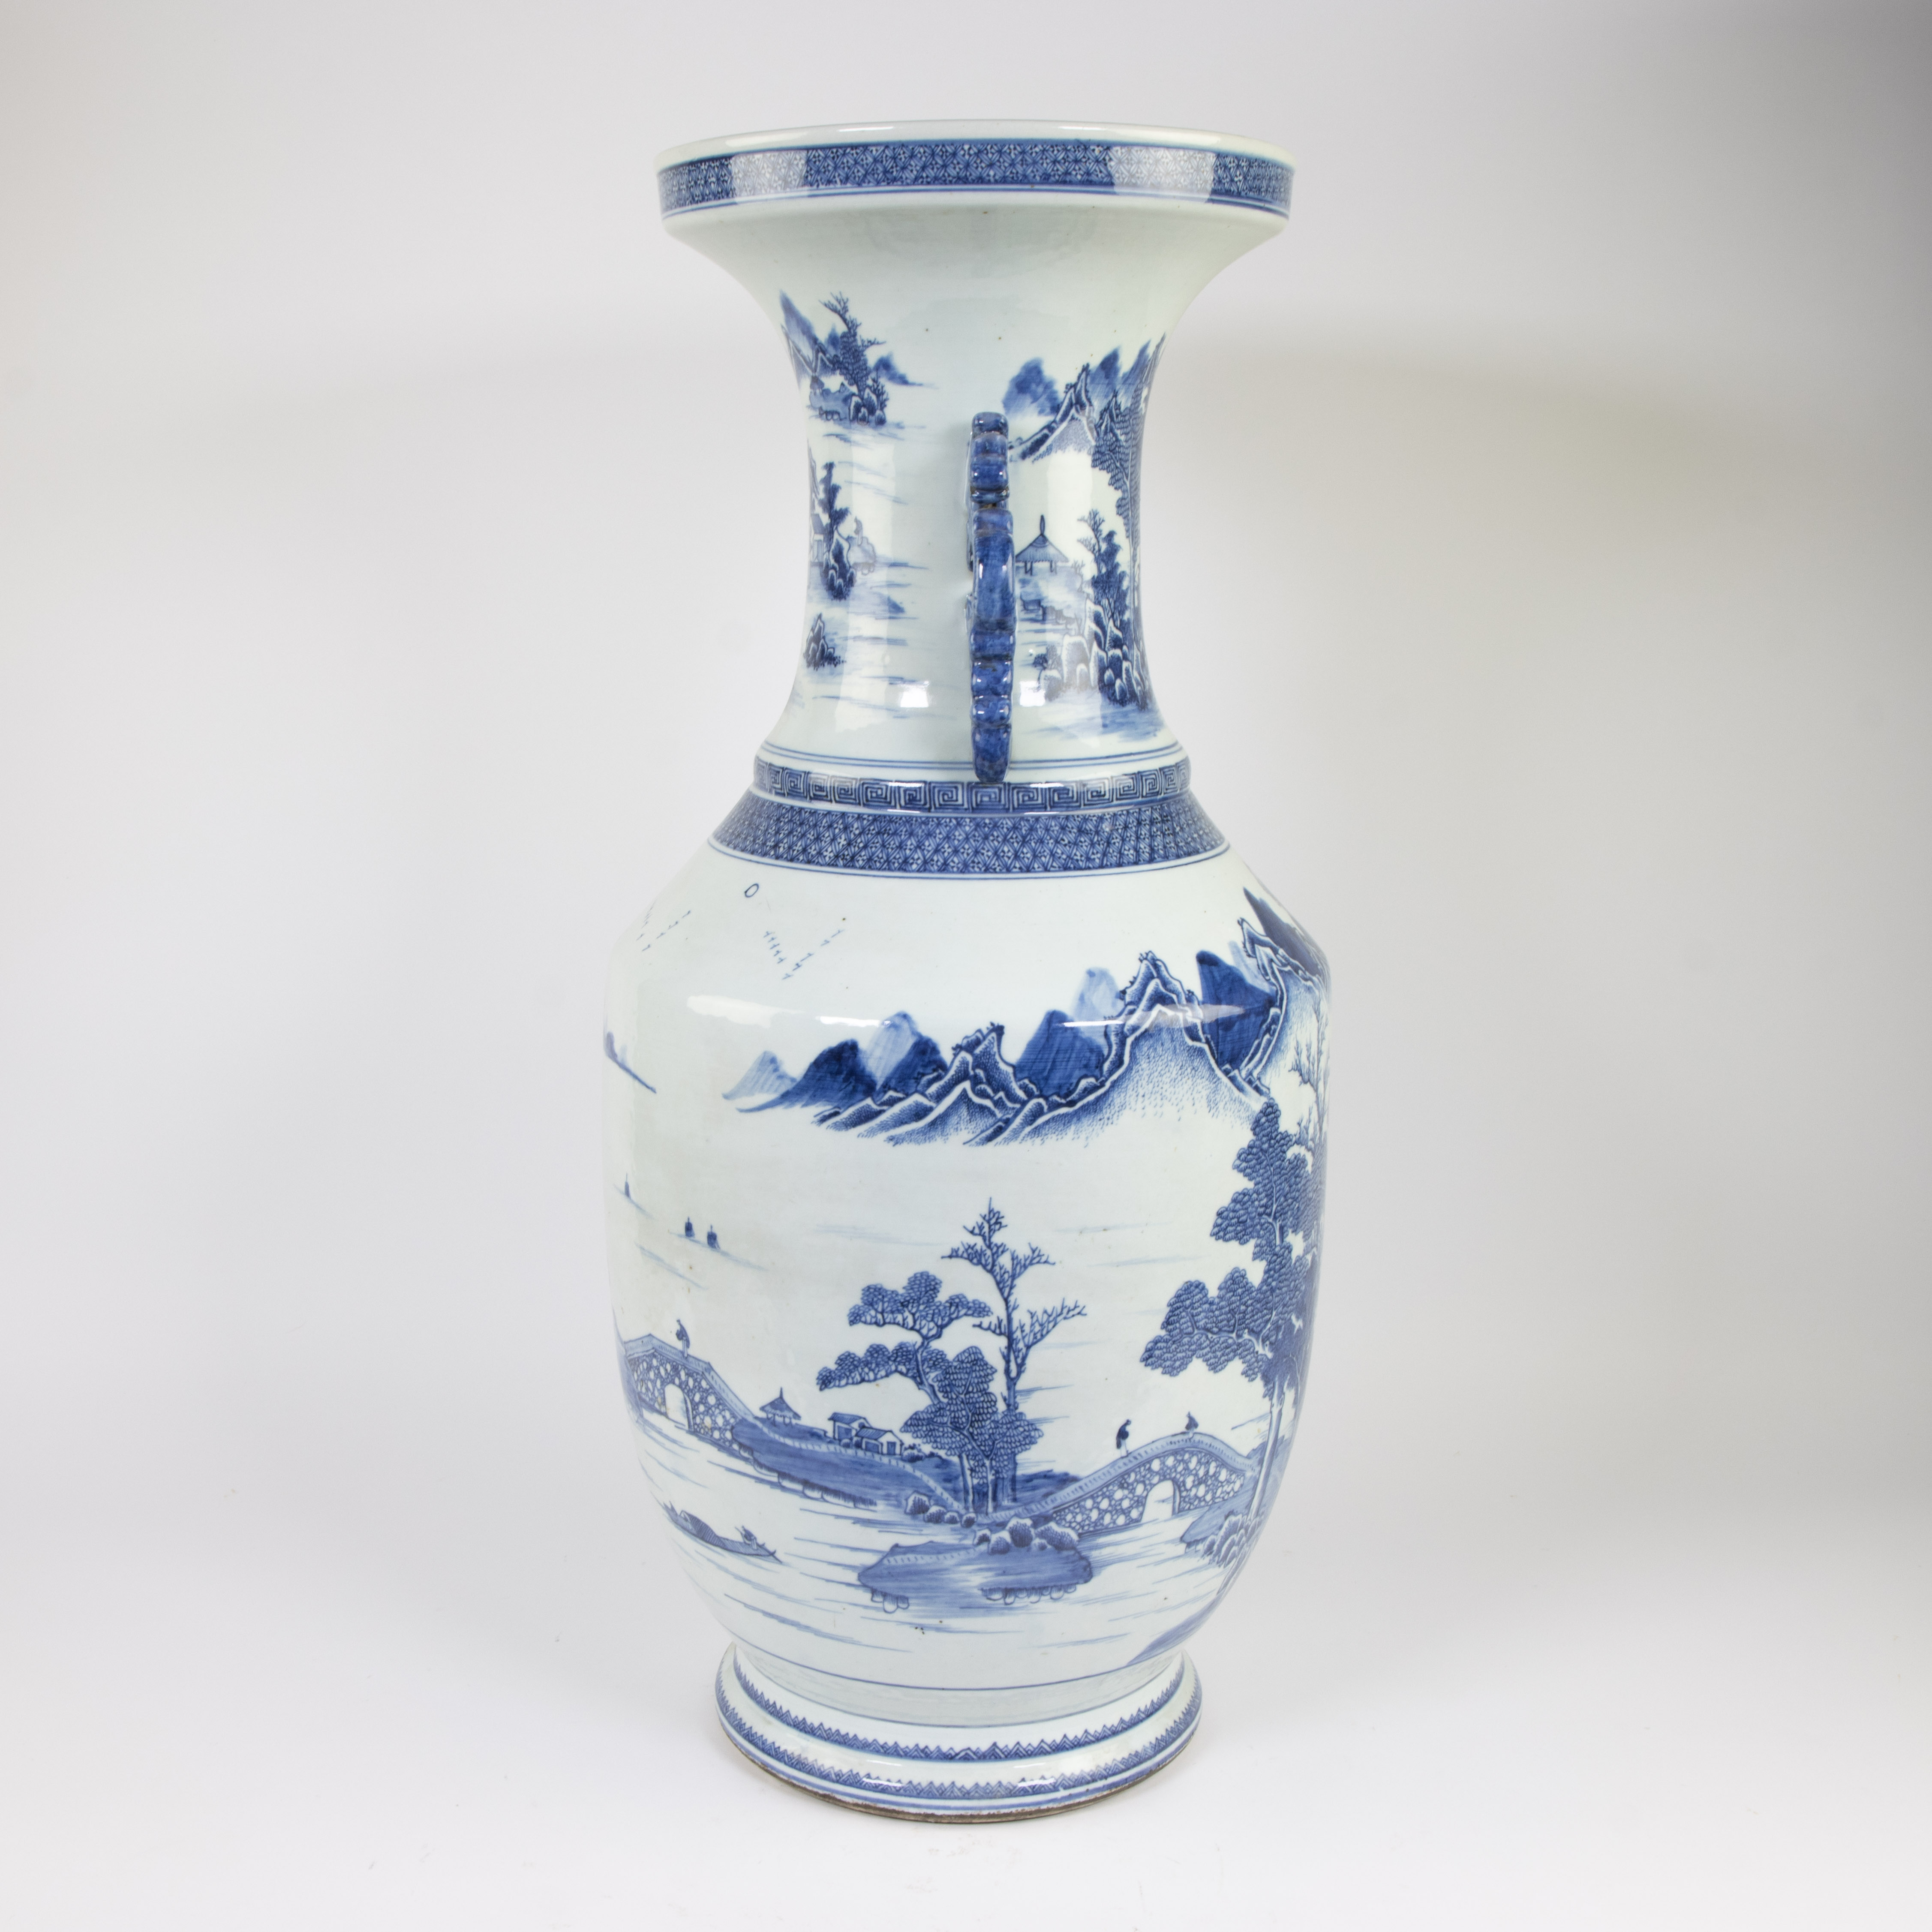 Large Chinese vase blue/white with floral mountain decor, late 19th century - Image 4 of 8